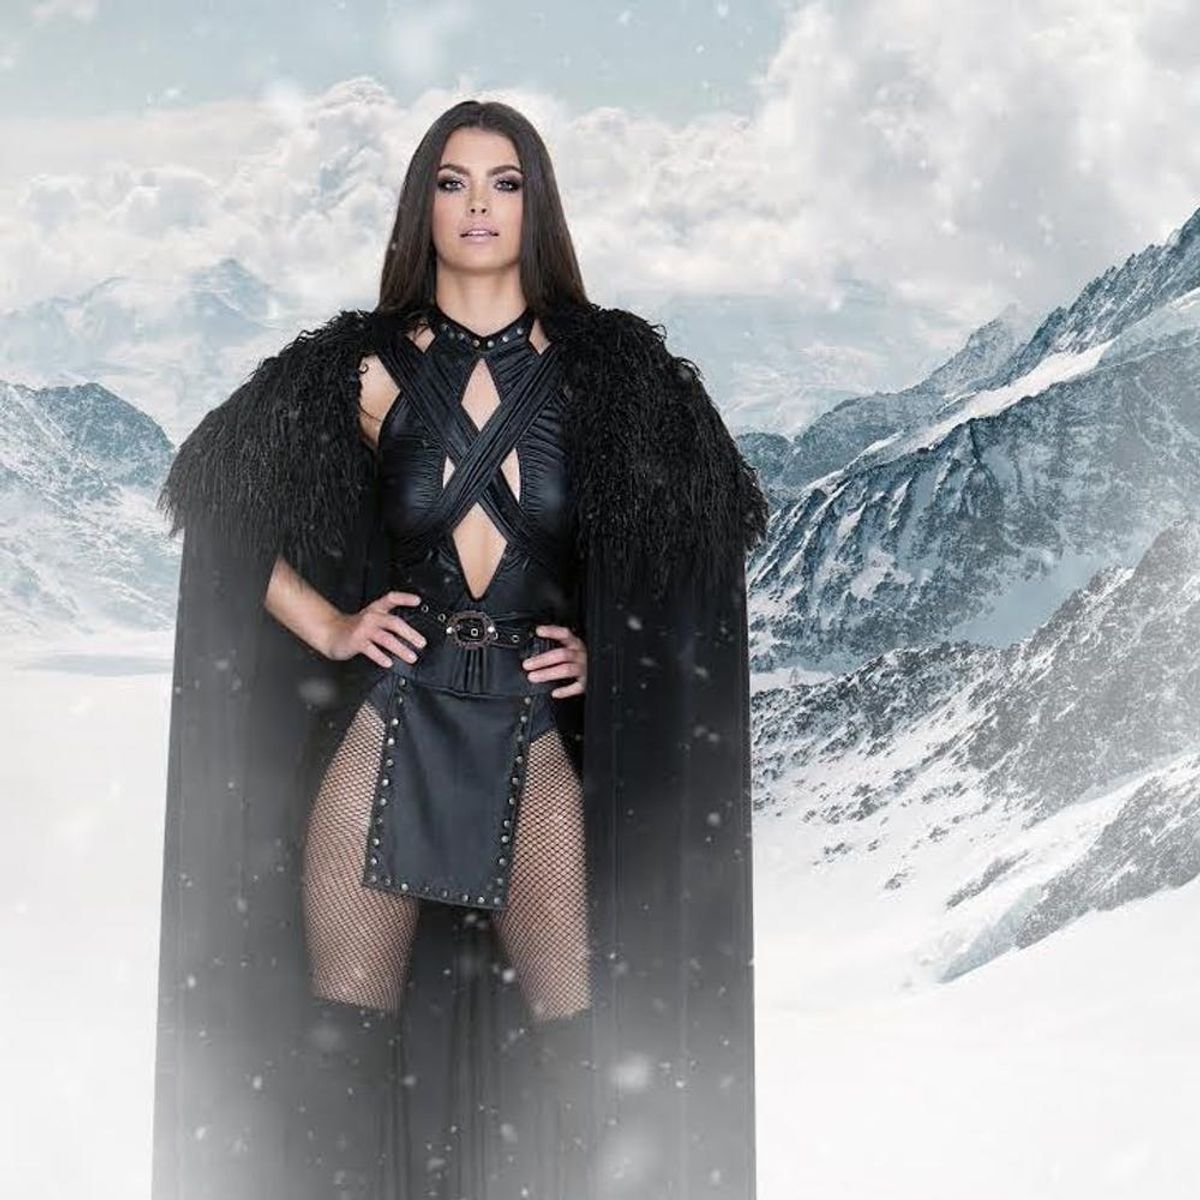 There’s a Sexy Jon Snow Costume Because Halloween Is Coming